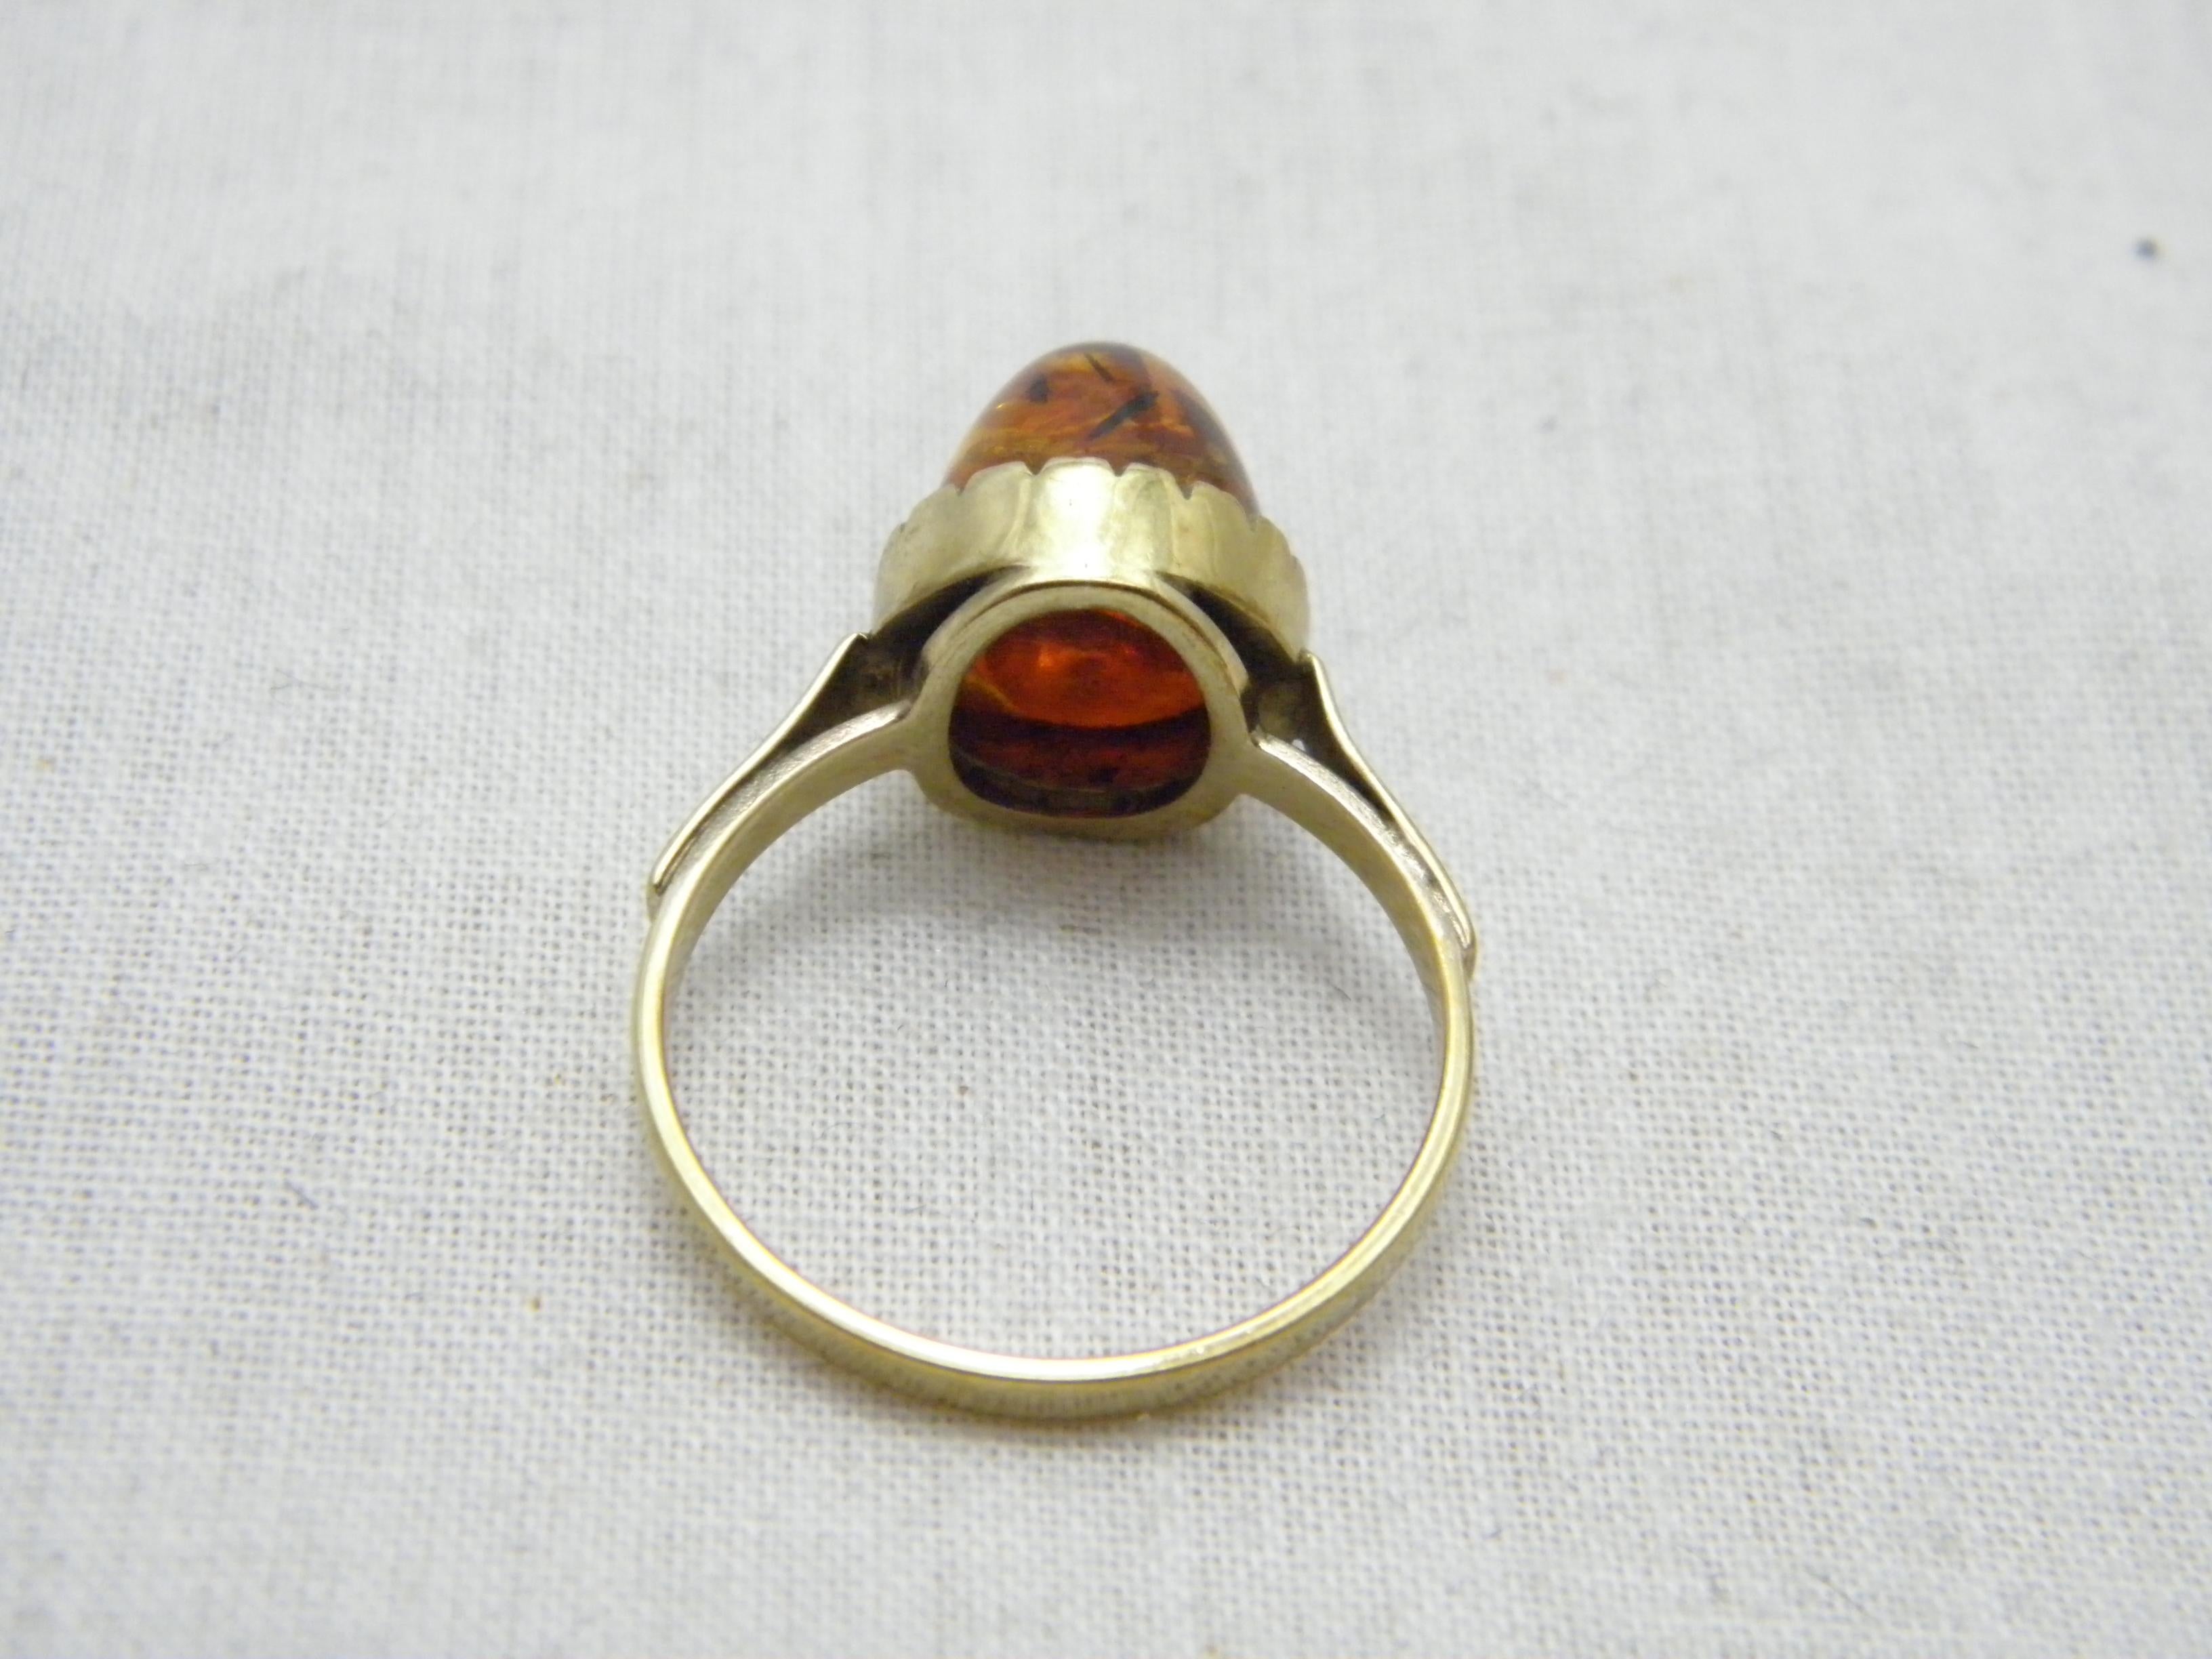 Antique 8ct Gold Baltic Amber Poison Ring Art Deco c1920 333 Purity For Sale 1